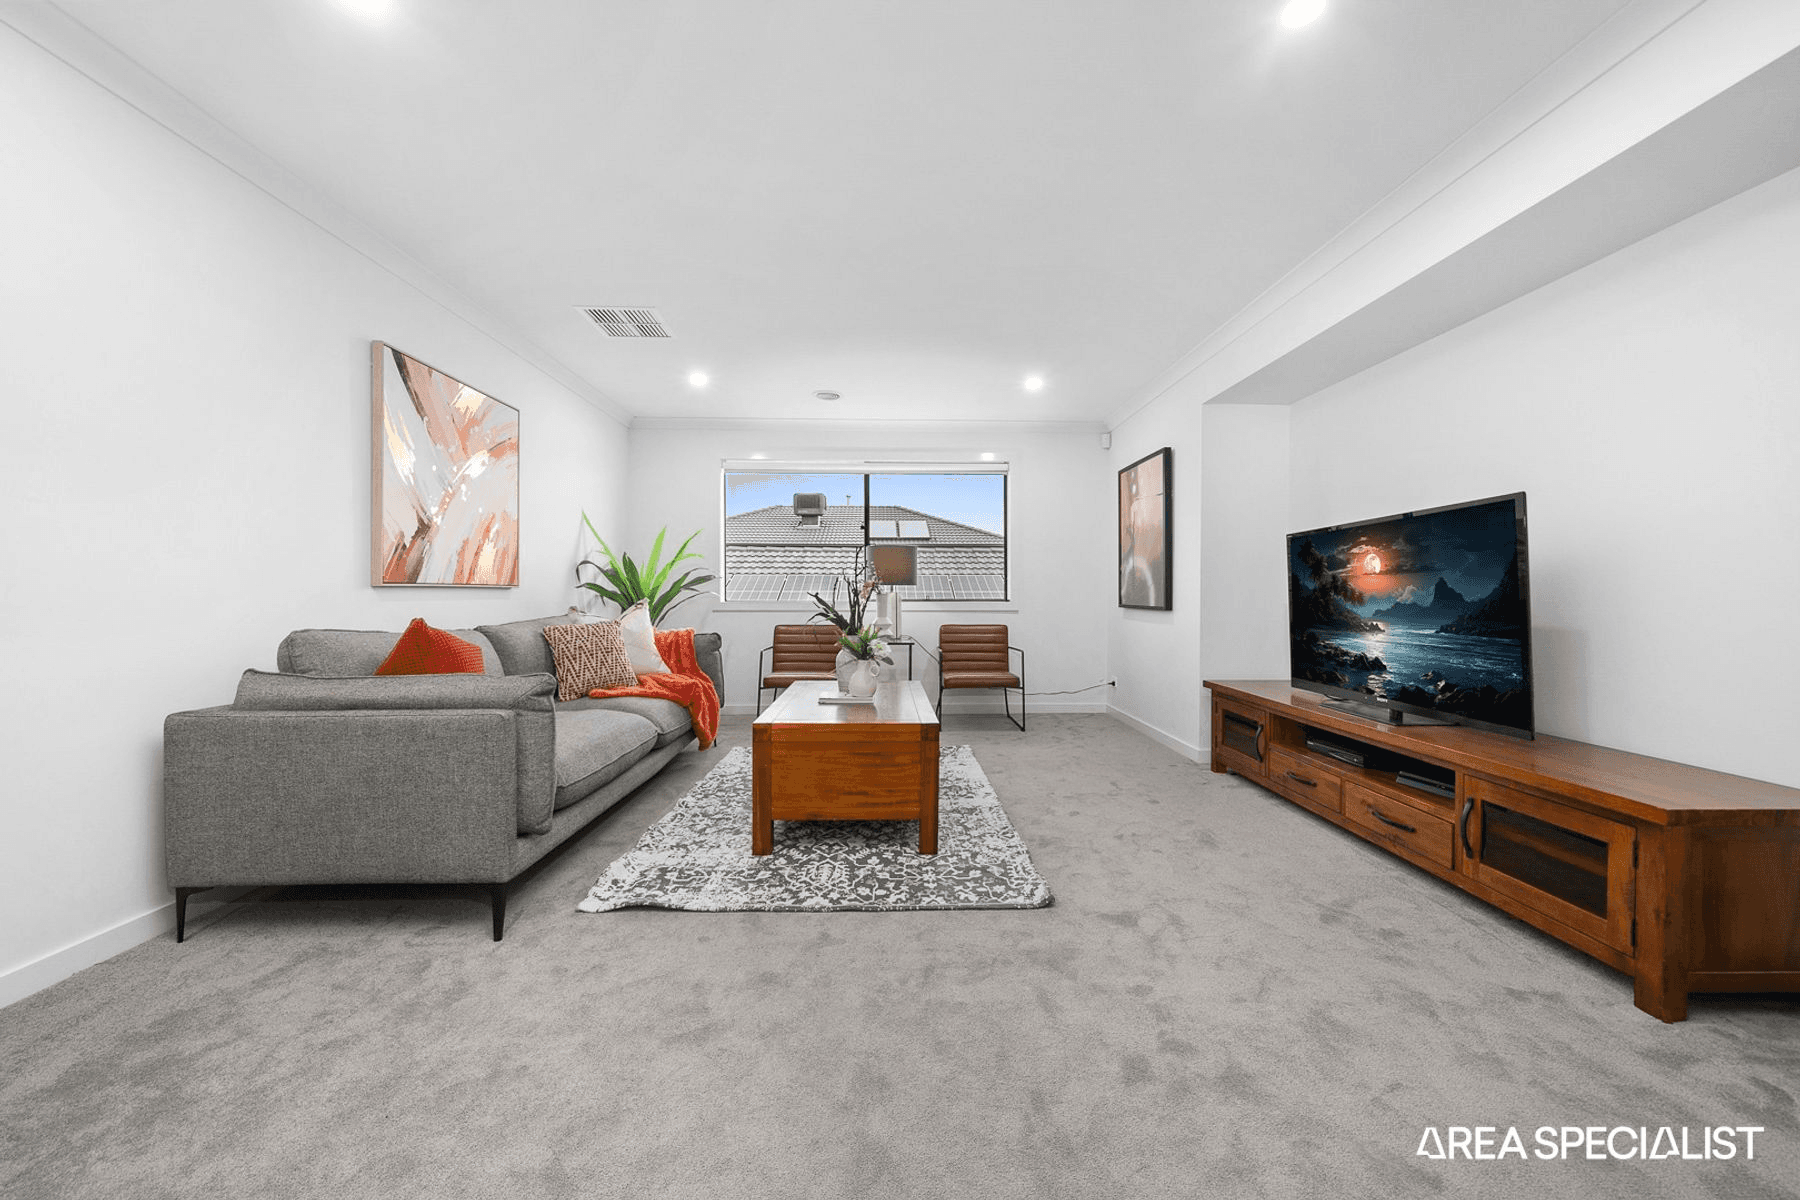 17 Omars Place, NARRE WARREN SOUTH, VIC 3805